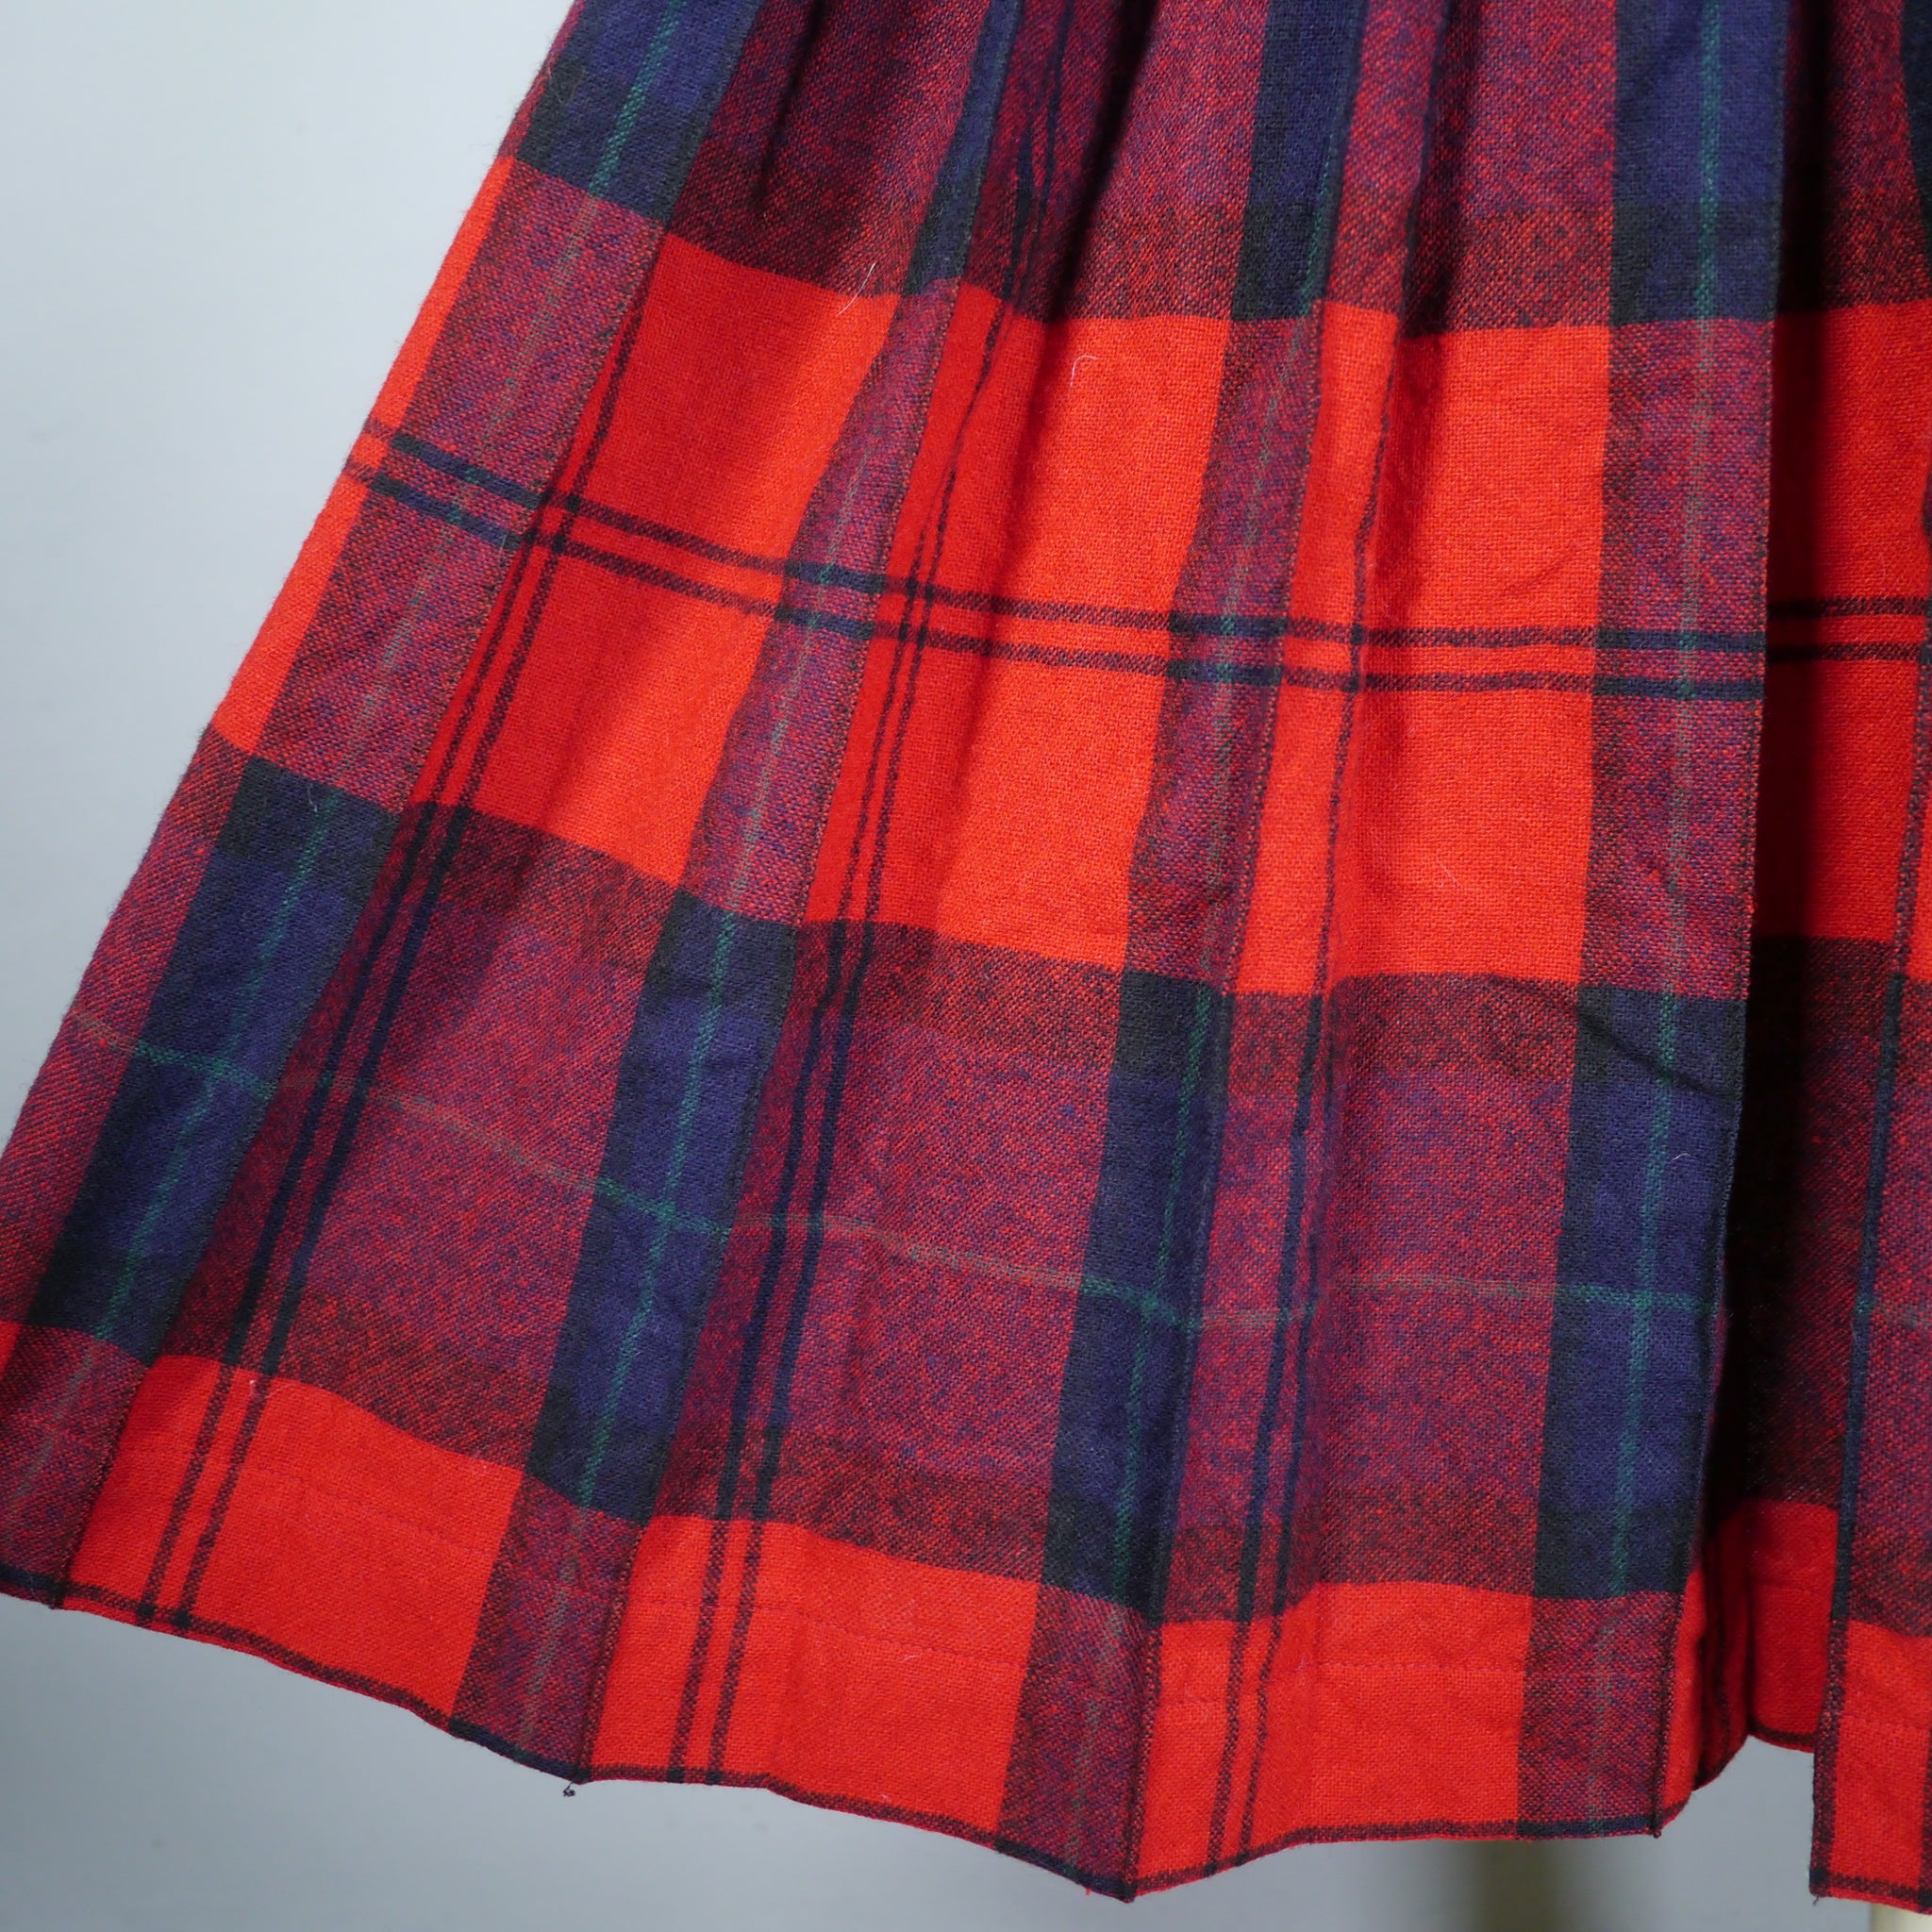 60s Vintage Red Green Plaid Pleated Skirt By Pendleton Turnabout Rever